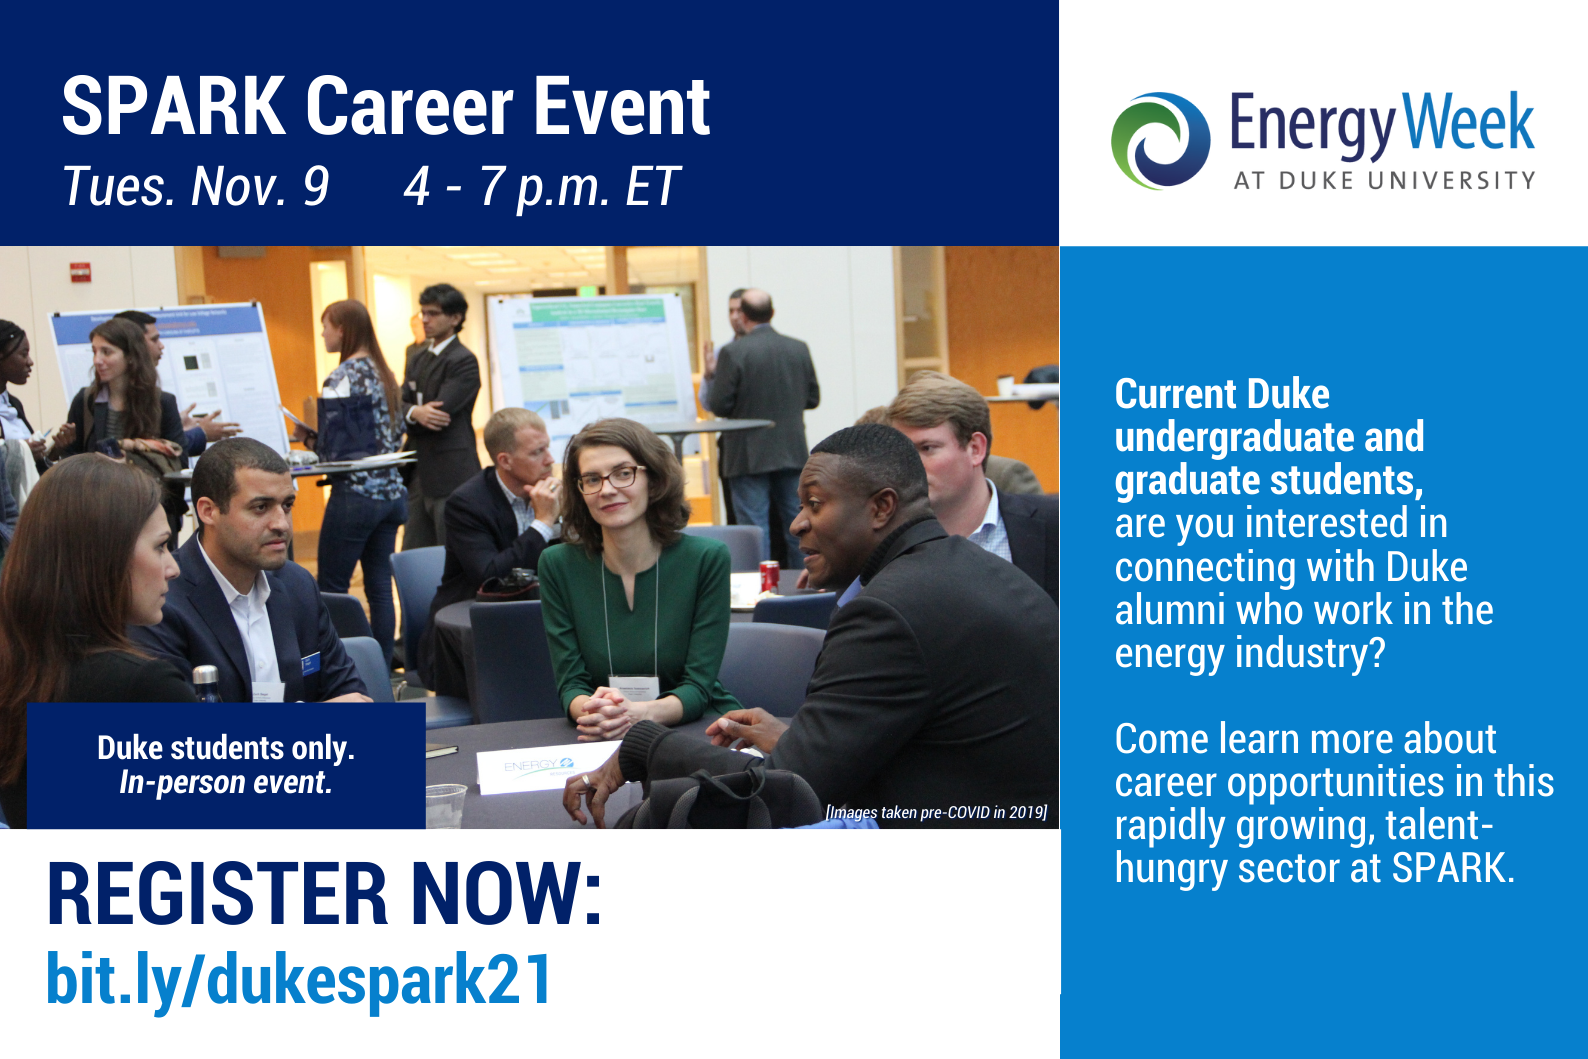 Title: SPARK Career Event. Date: Tues. Nov 9, 4-7p.m. Photo: Past Duke University Energy Week conference attendees conversating. Text: Duke students only. In-person event. Register Now: bit.ly/dukespark21